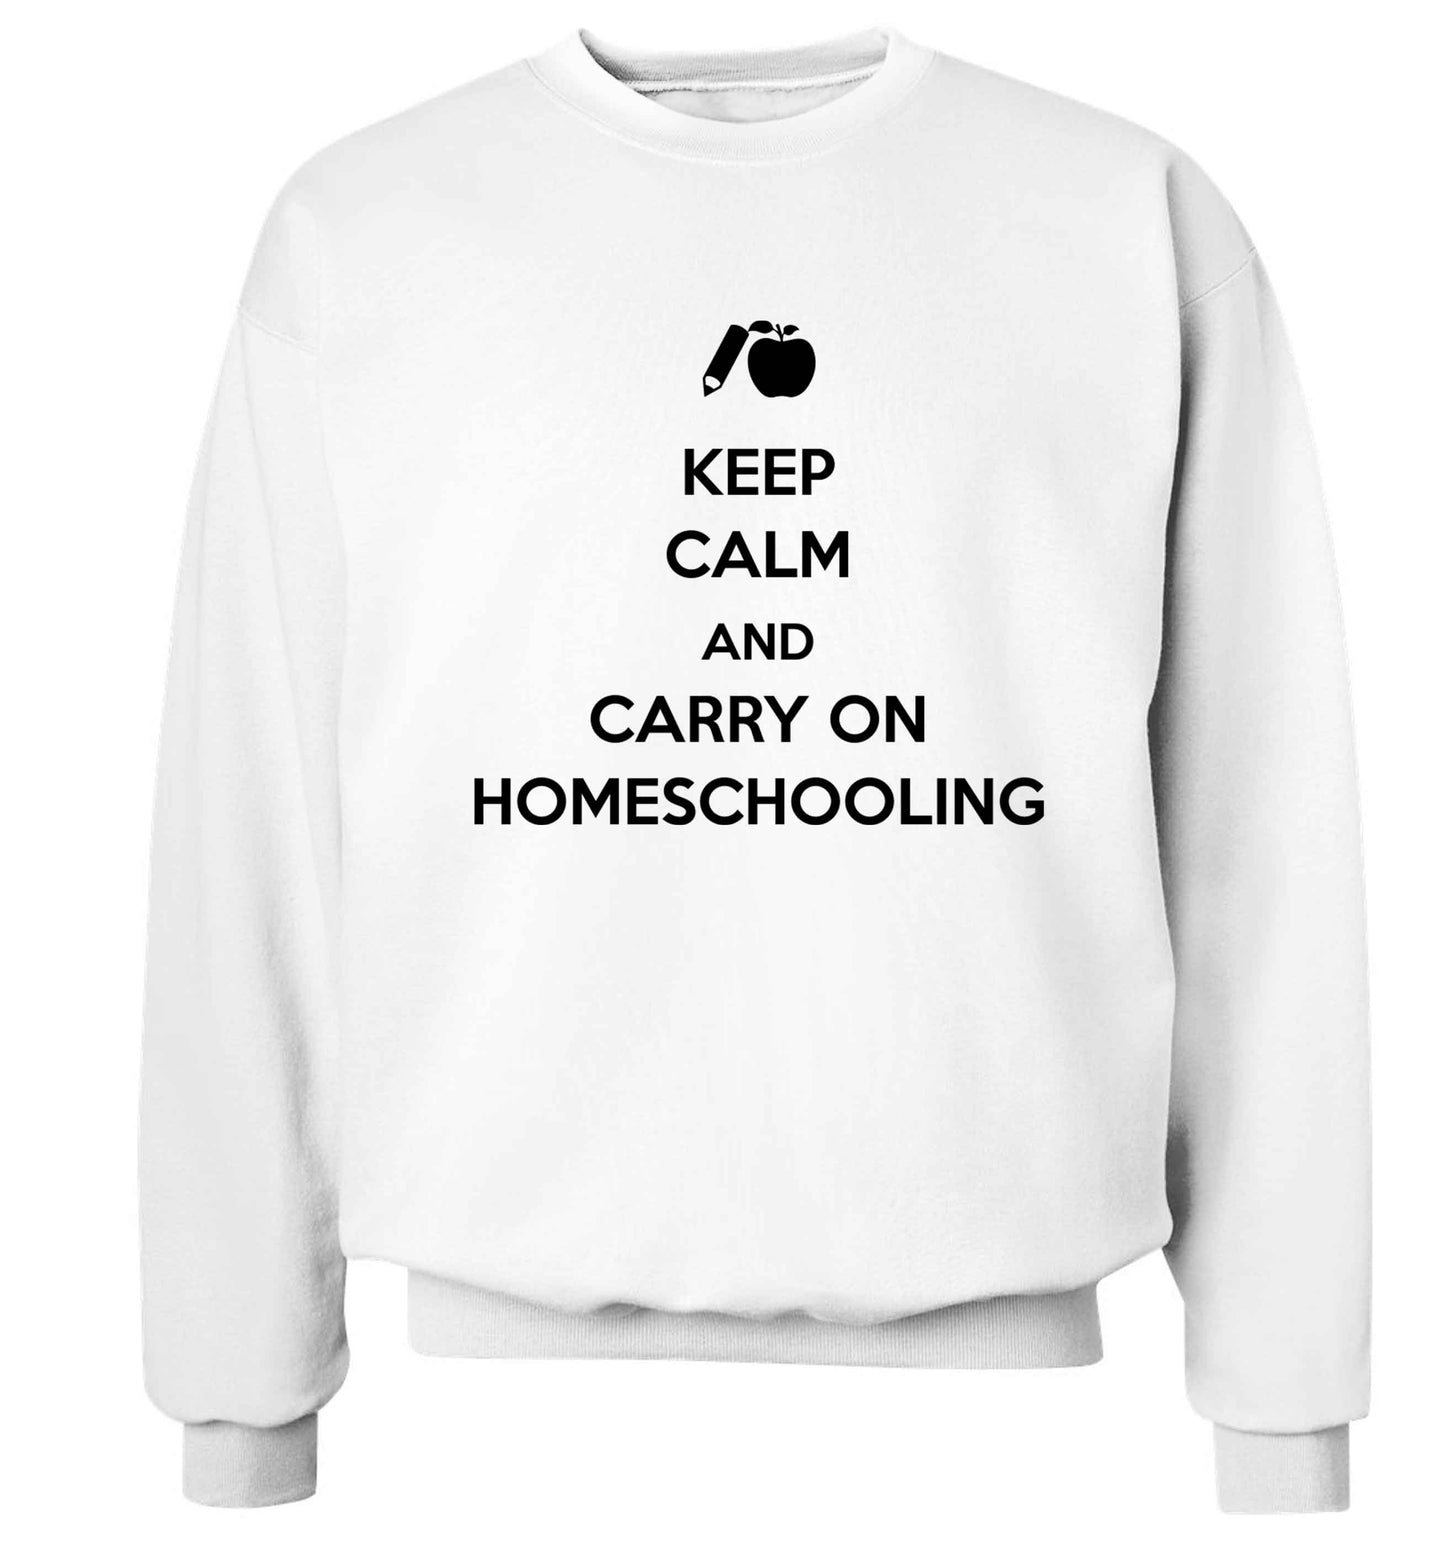 Keep calm and carry on homeschooling Adult's unisex white Sweater 2XL